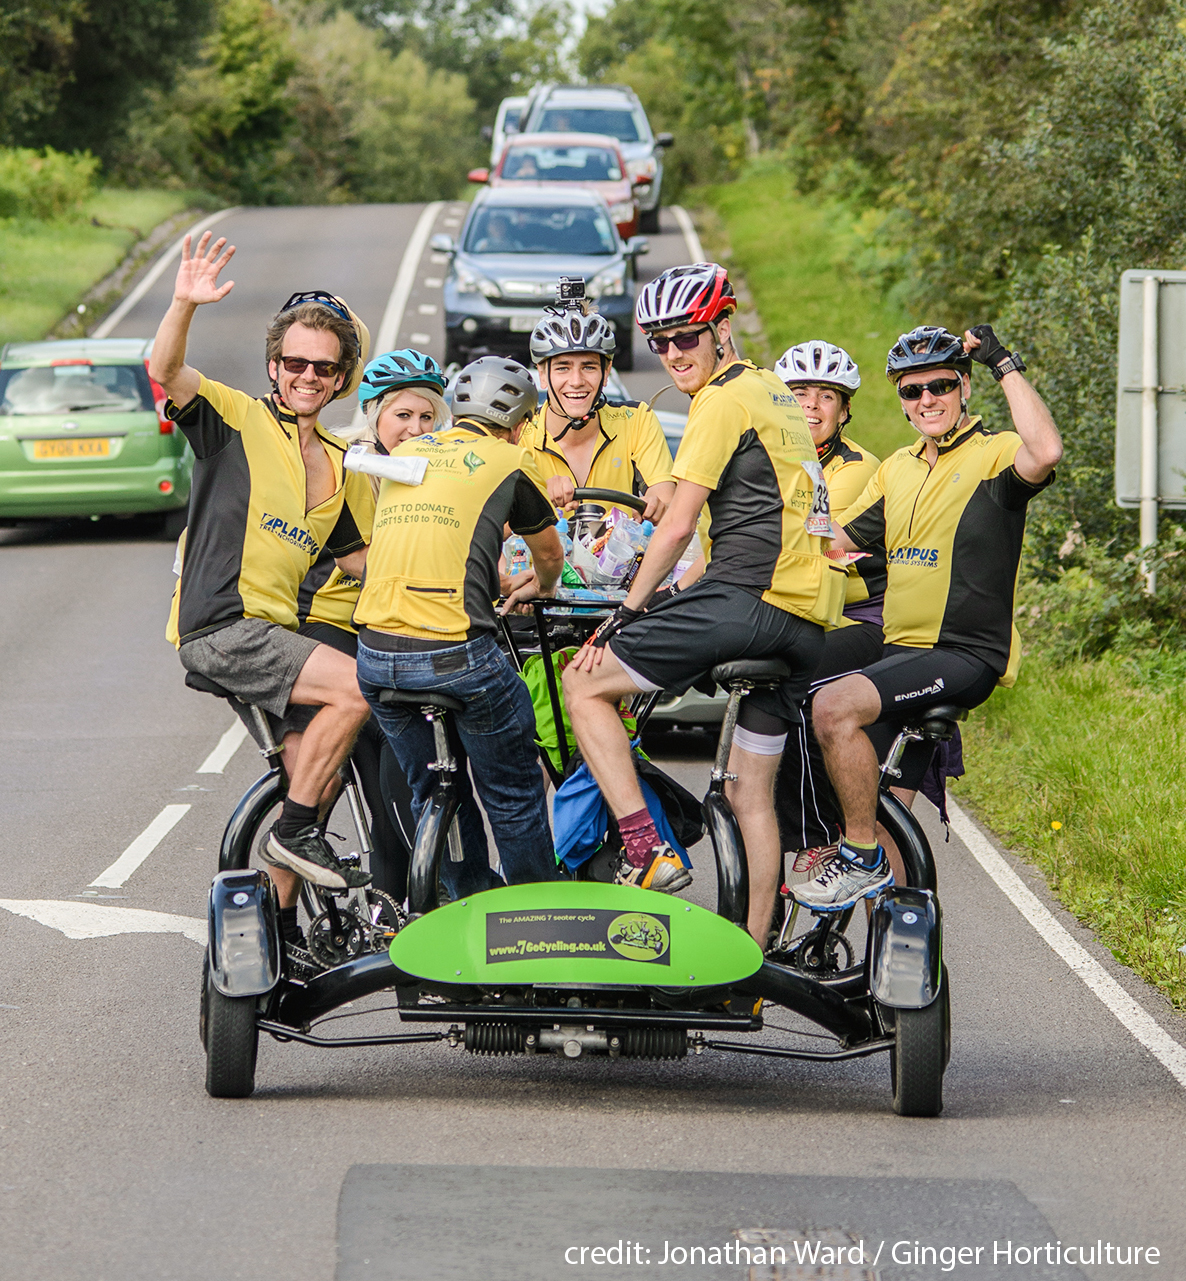 PLATIPUS AND PERENNIAL SUPPORTERS BREAK THE RECORD OF THE LONDON-BRIGHTON CYCLE RIDE ON A 7-SEATER CYCLE!